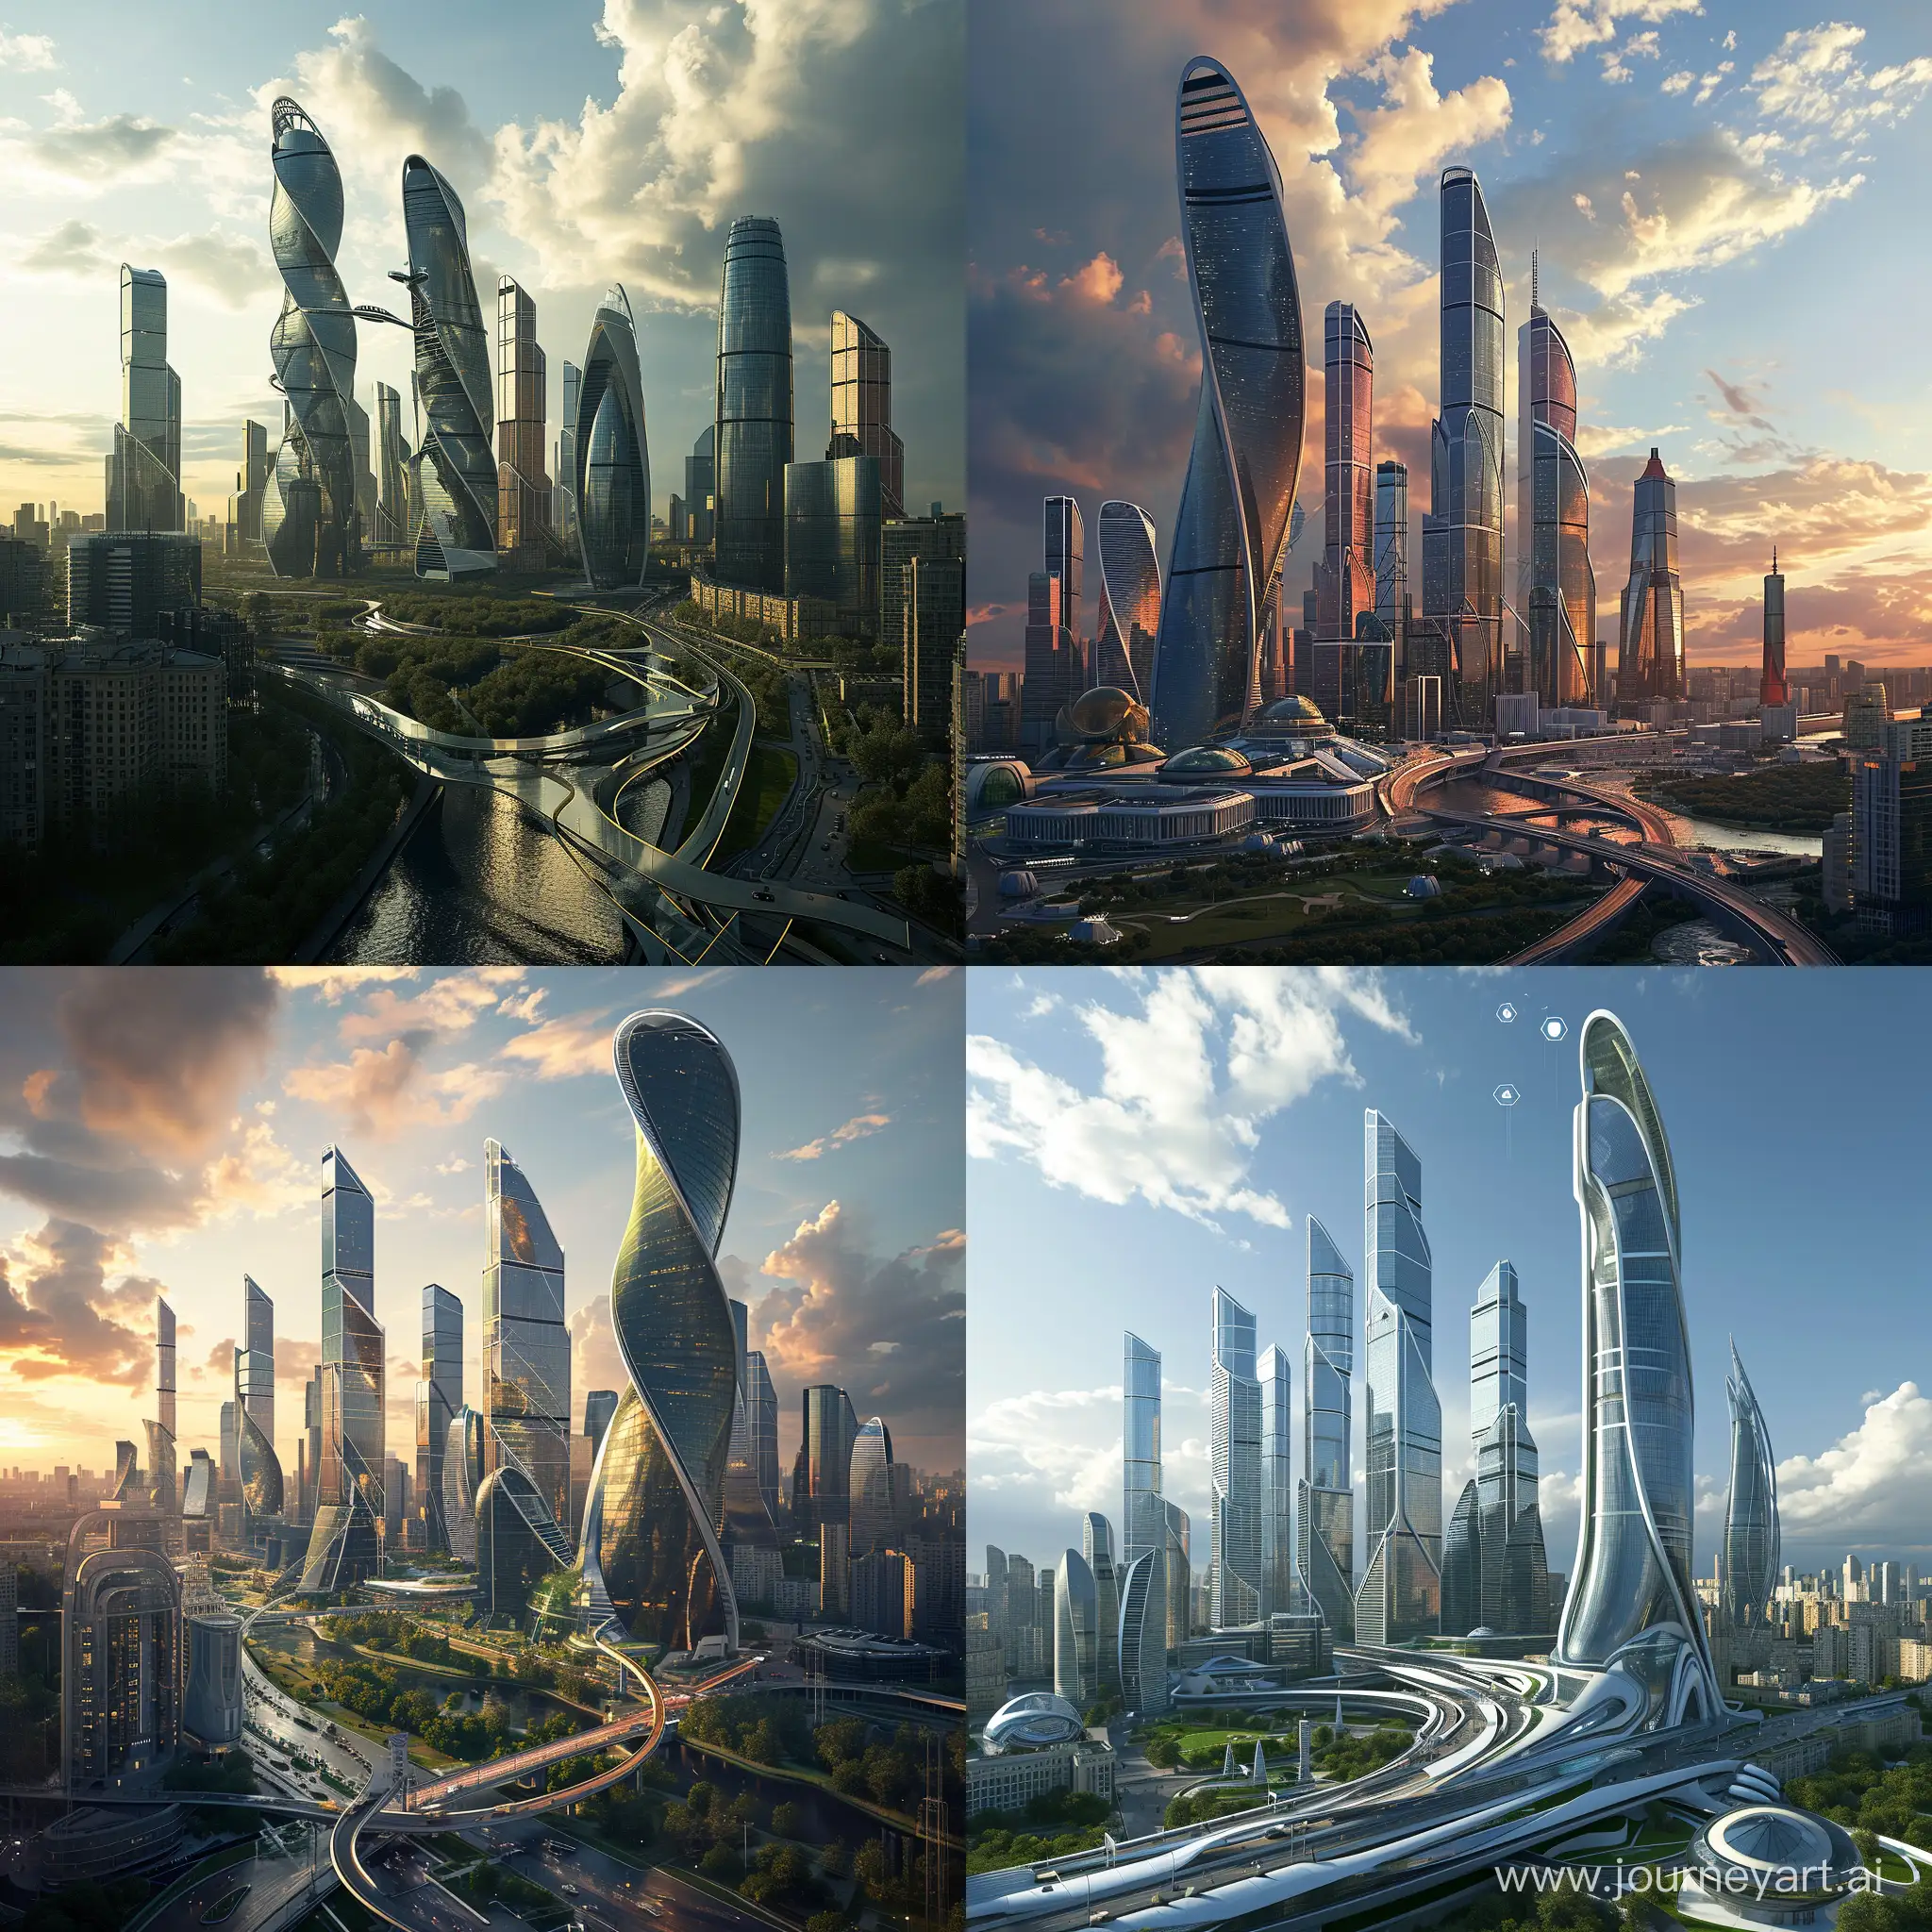 Futuristic Moscow, sky-high skyscrapers, advanced transportation systems, sustainable energy sources, smart infrastructure, virtual and augmented reality experiences, advanced healthcare facilities, automated homes and workplaces, green spaces and parks, cultural and artistic hubs, global connectivity --v 6